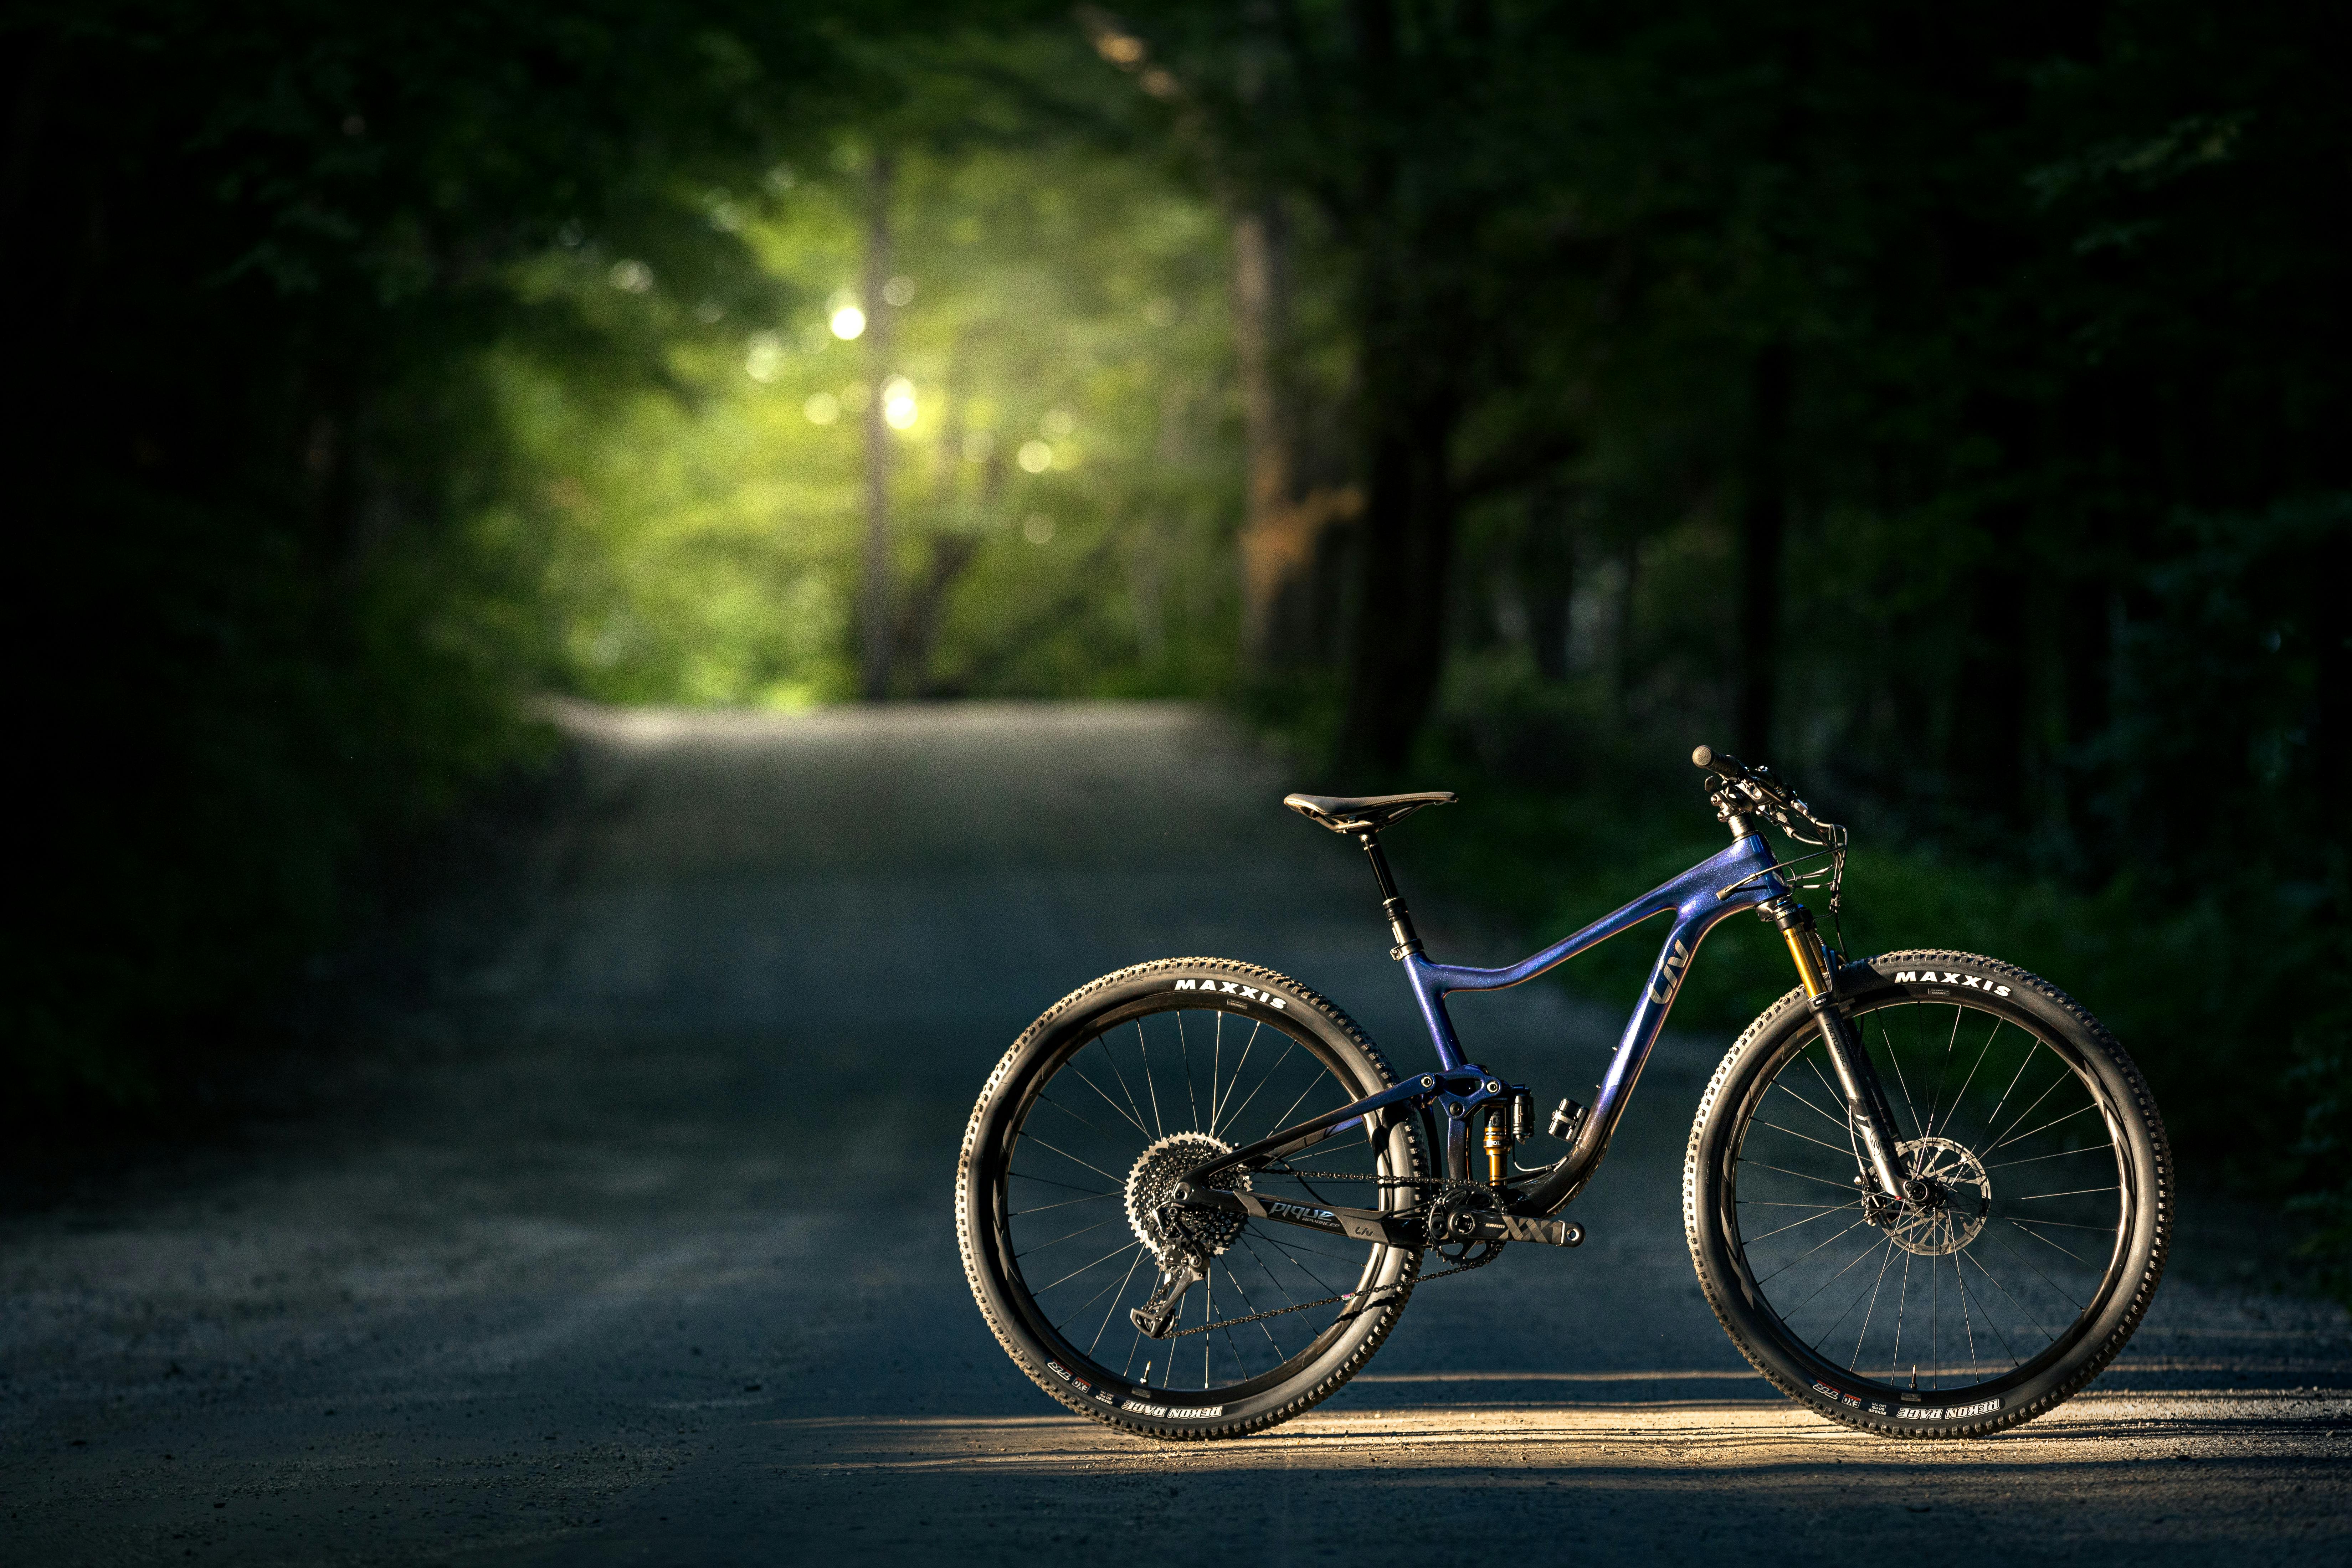 A mountain bike made by Liv Cycling standing on a road and illuminated by the sun with a dark forest tunnel in the background.